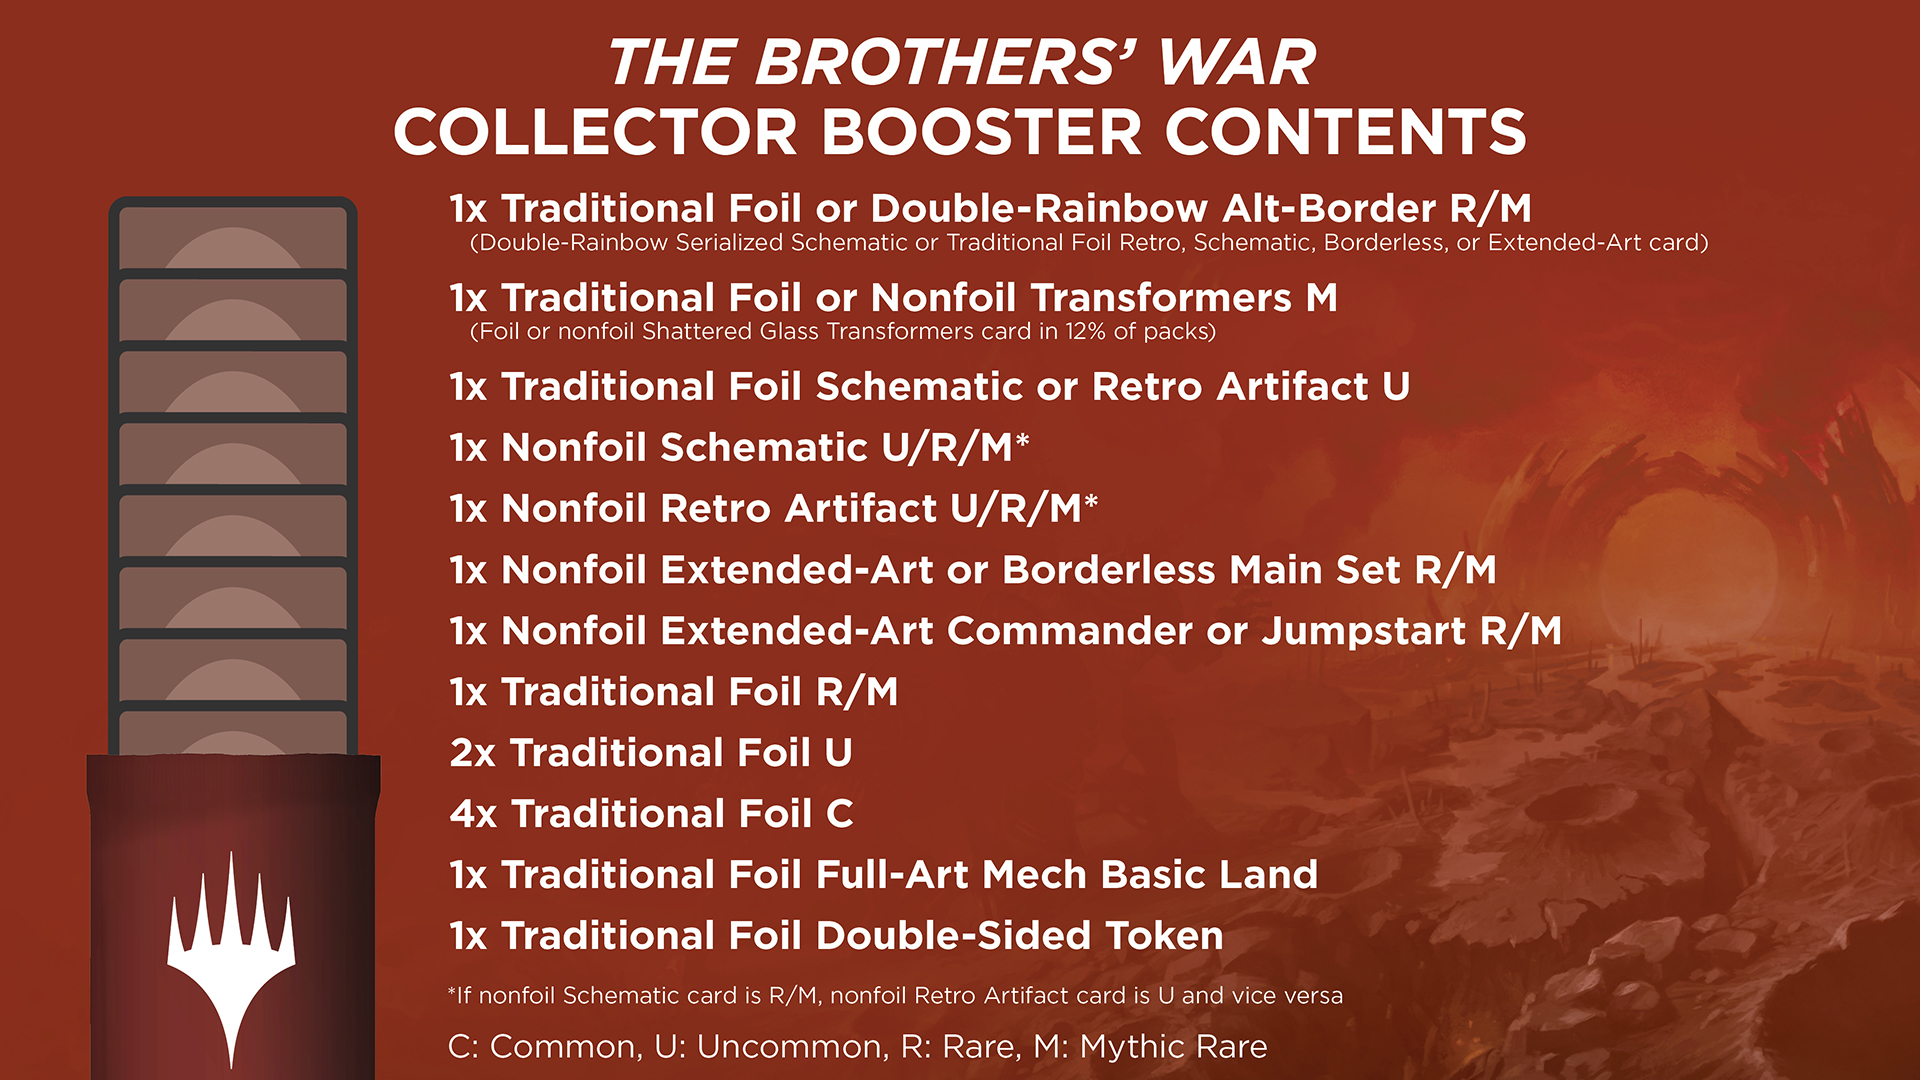 The Brothers' War Collector Booster Collation Infographic